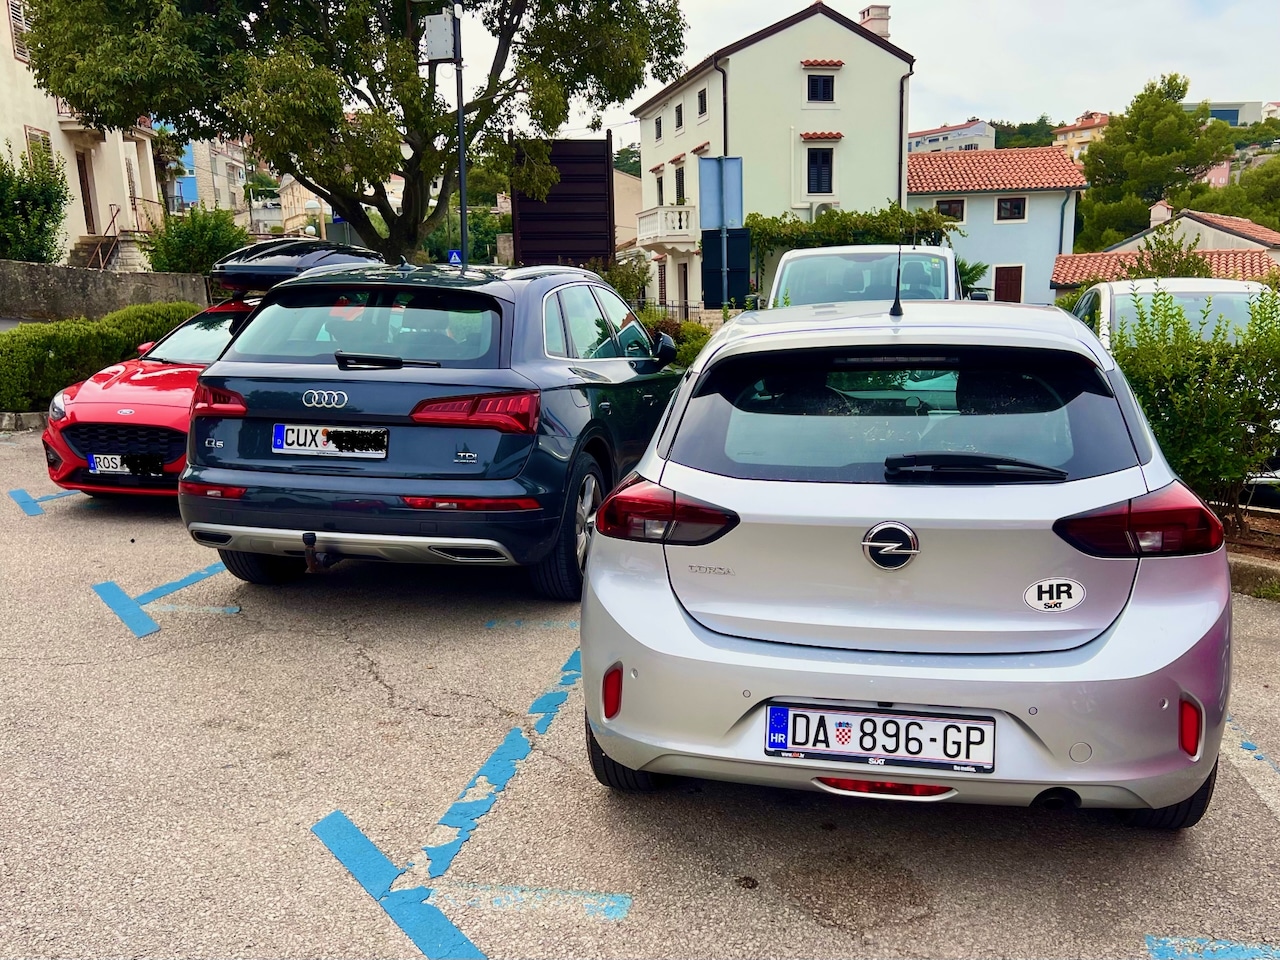 Blue lines on the ground mean: Go to the nearest parking machine and get a ticket! Photo: Sascha Tegtmeyer Rental car Krk experience report - car routes on the island